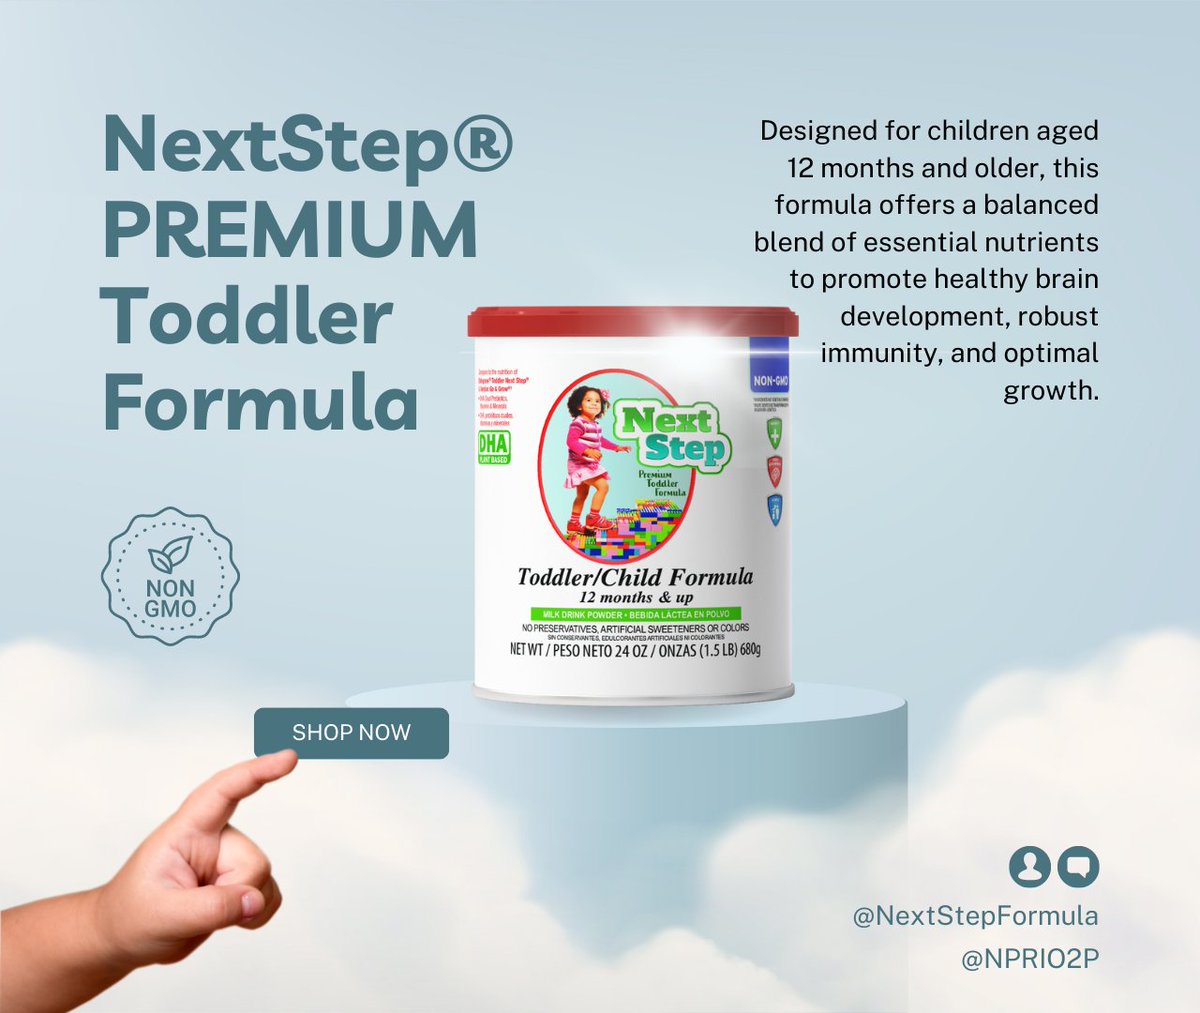 Check out o2pus.com for premium toddler formula! Specifically designed for ages 12 & up, this supplemental formula is a must-have for your little one's health and growth. Get yours today! #premiumformula #toddlergrowth #supplementalnutrition